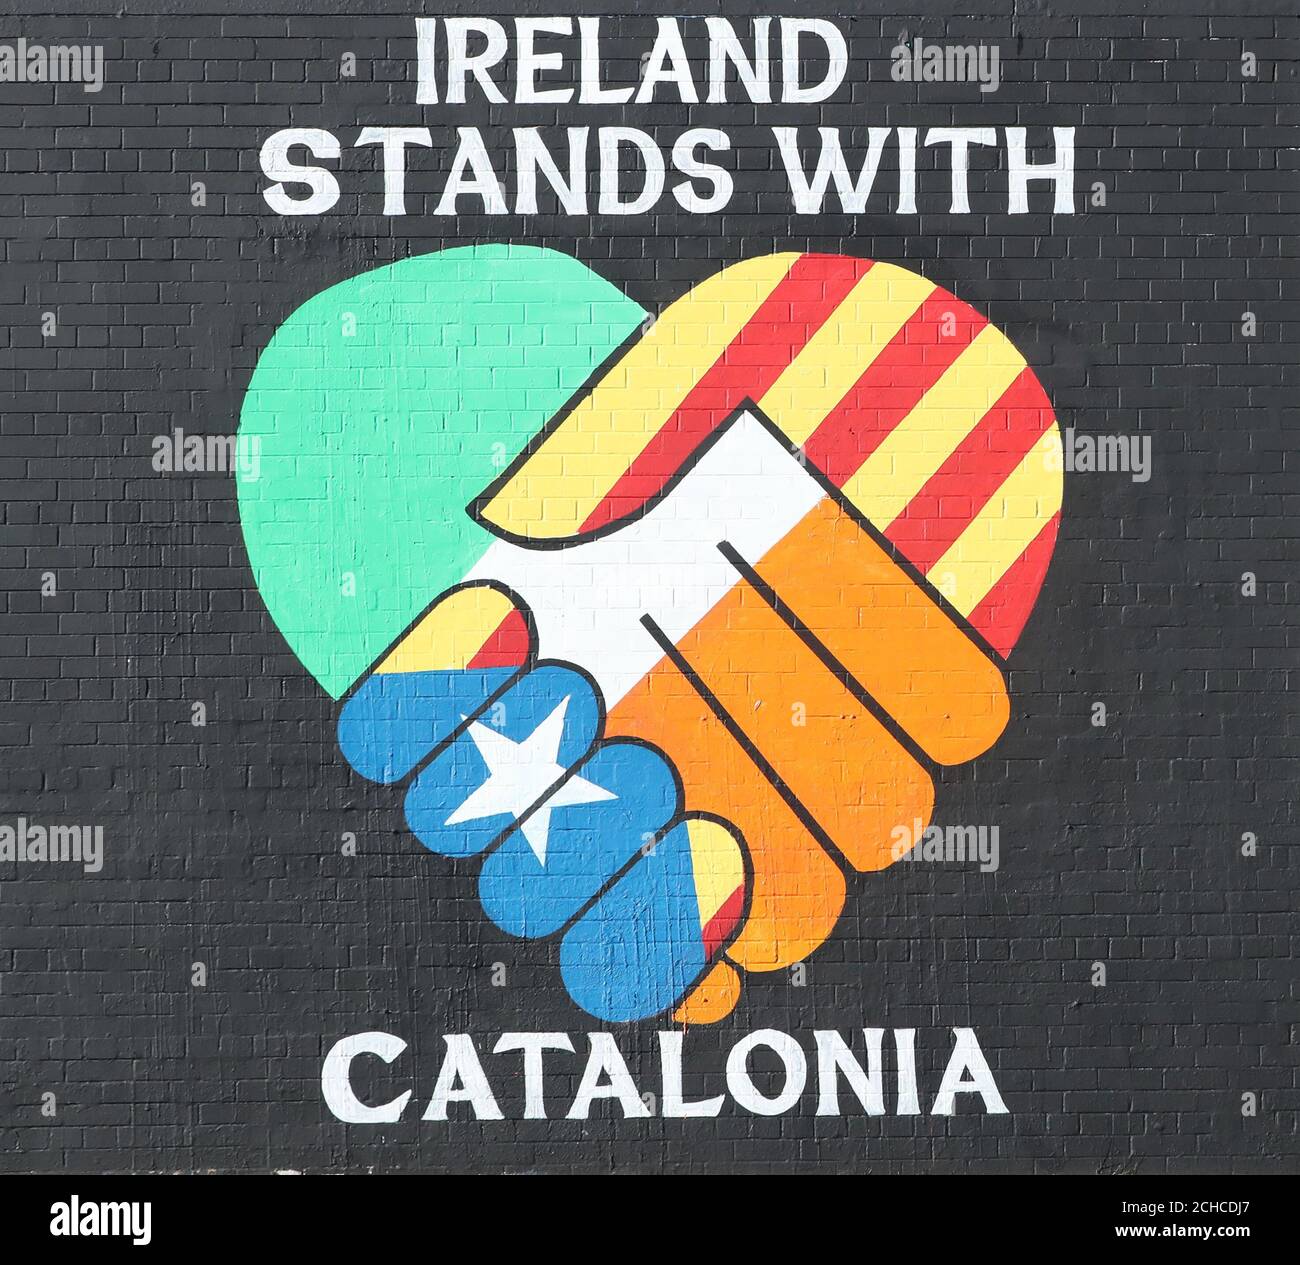 A new pro Catalan independence mural on Belfast's Falls road. Stock Photo